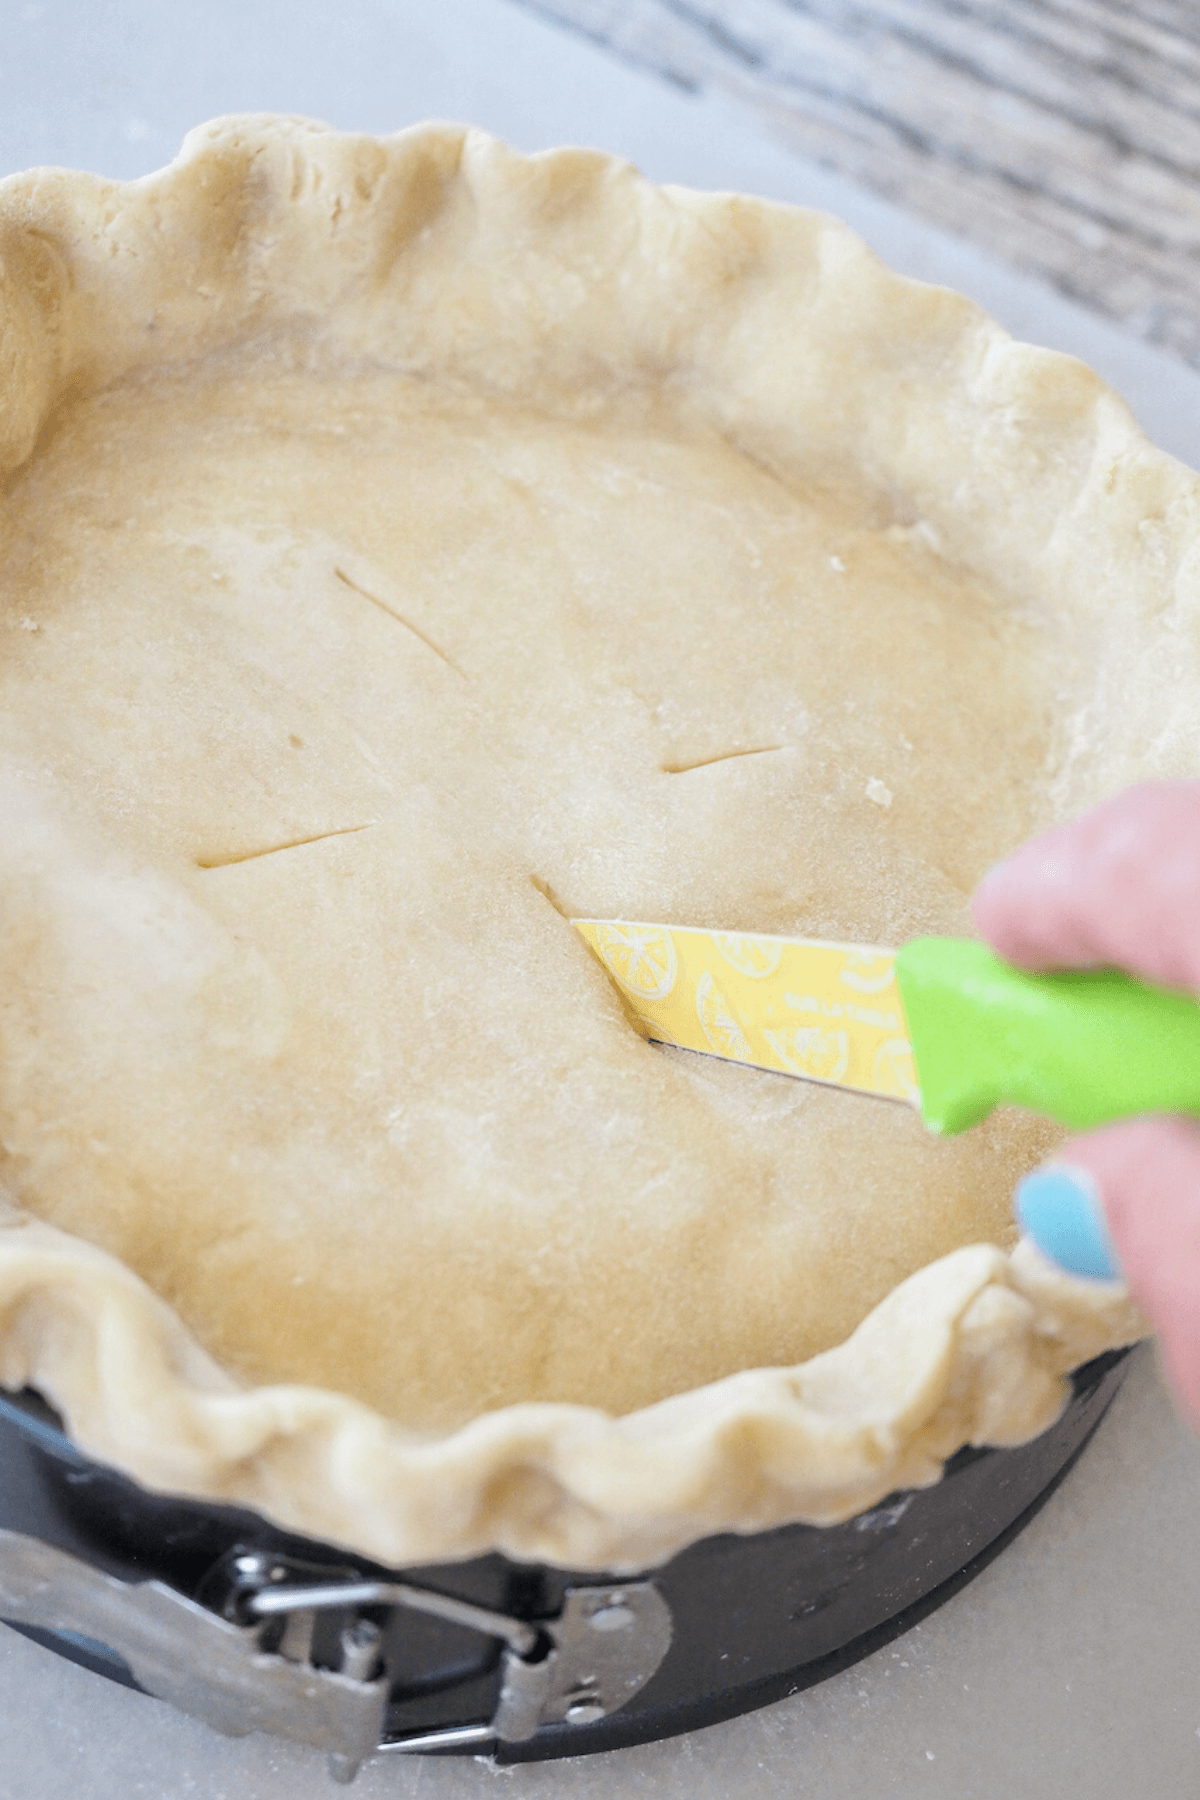 Cutting slits into crust to allow steam escape.